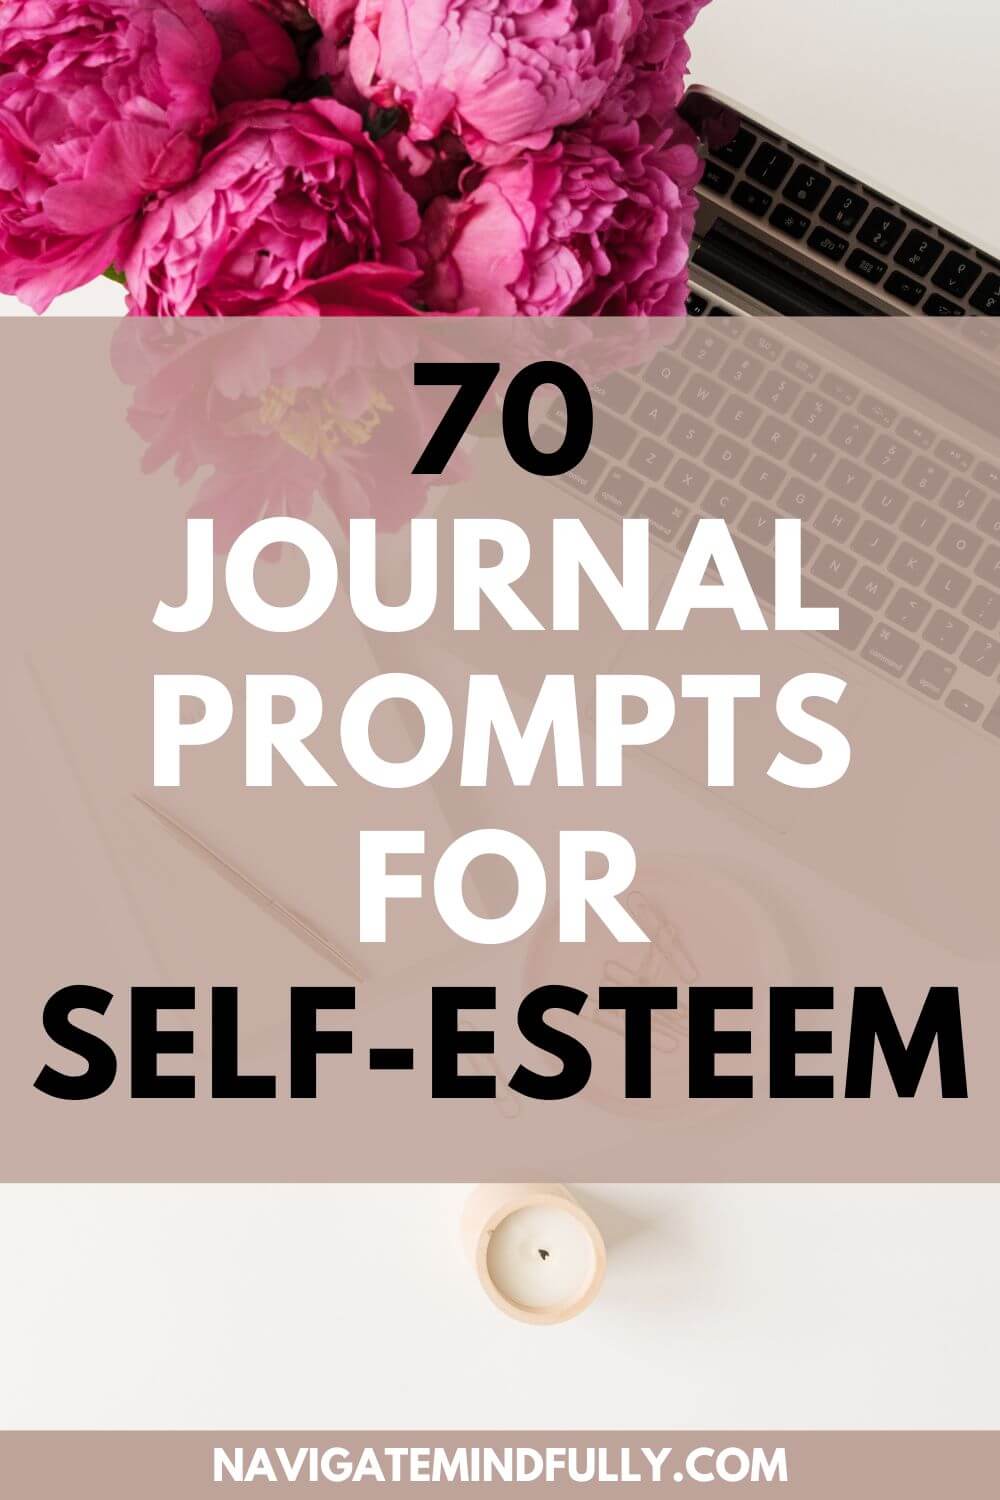 70 Self-Esteem Journal Prompts: Your Way to Confidence